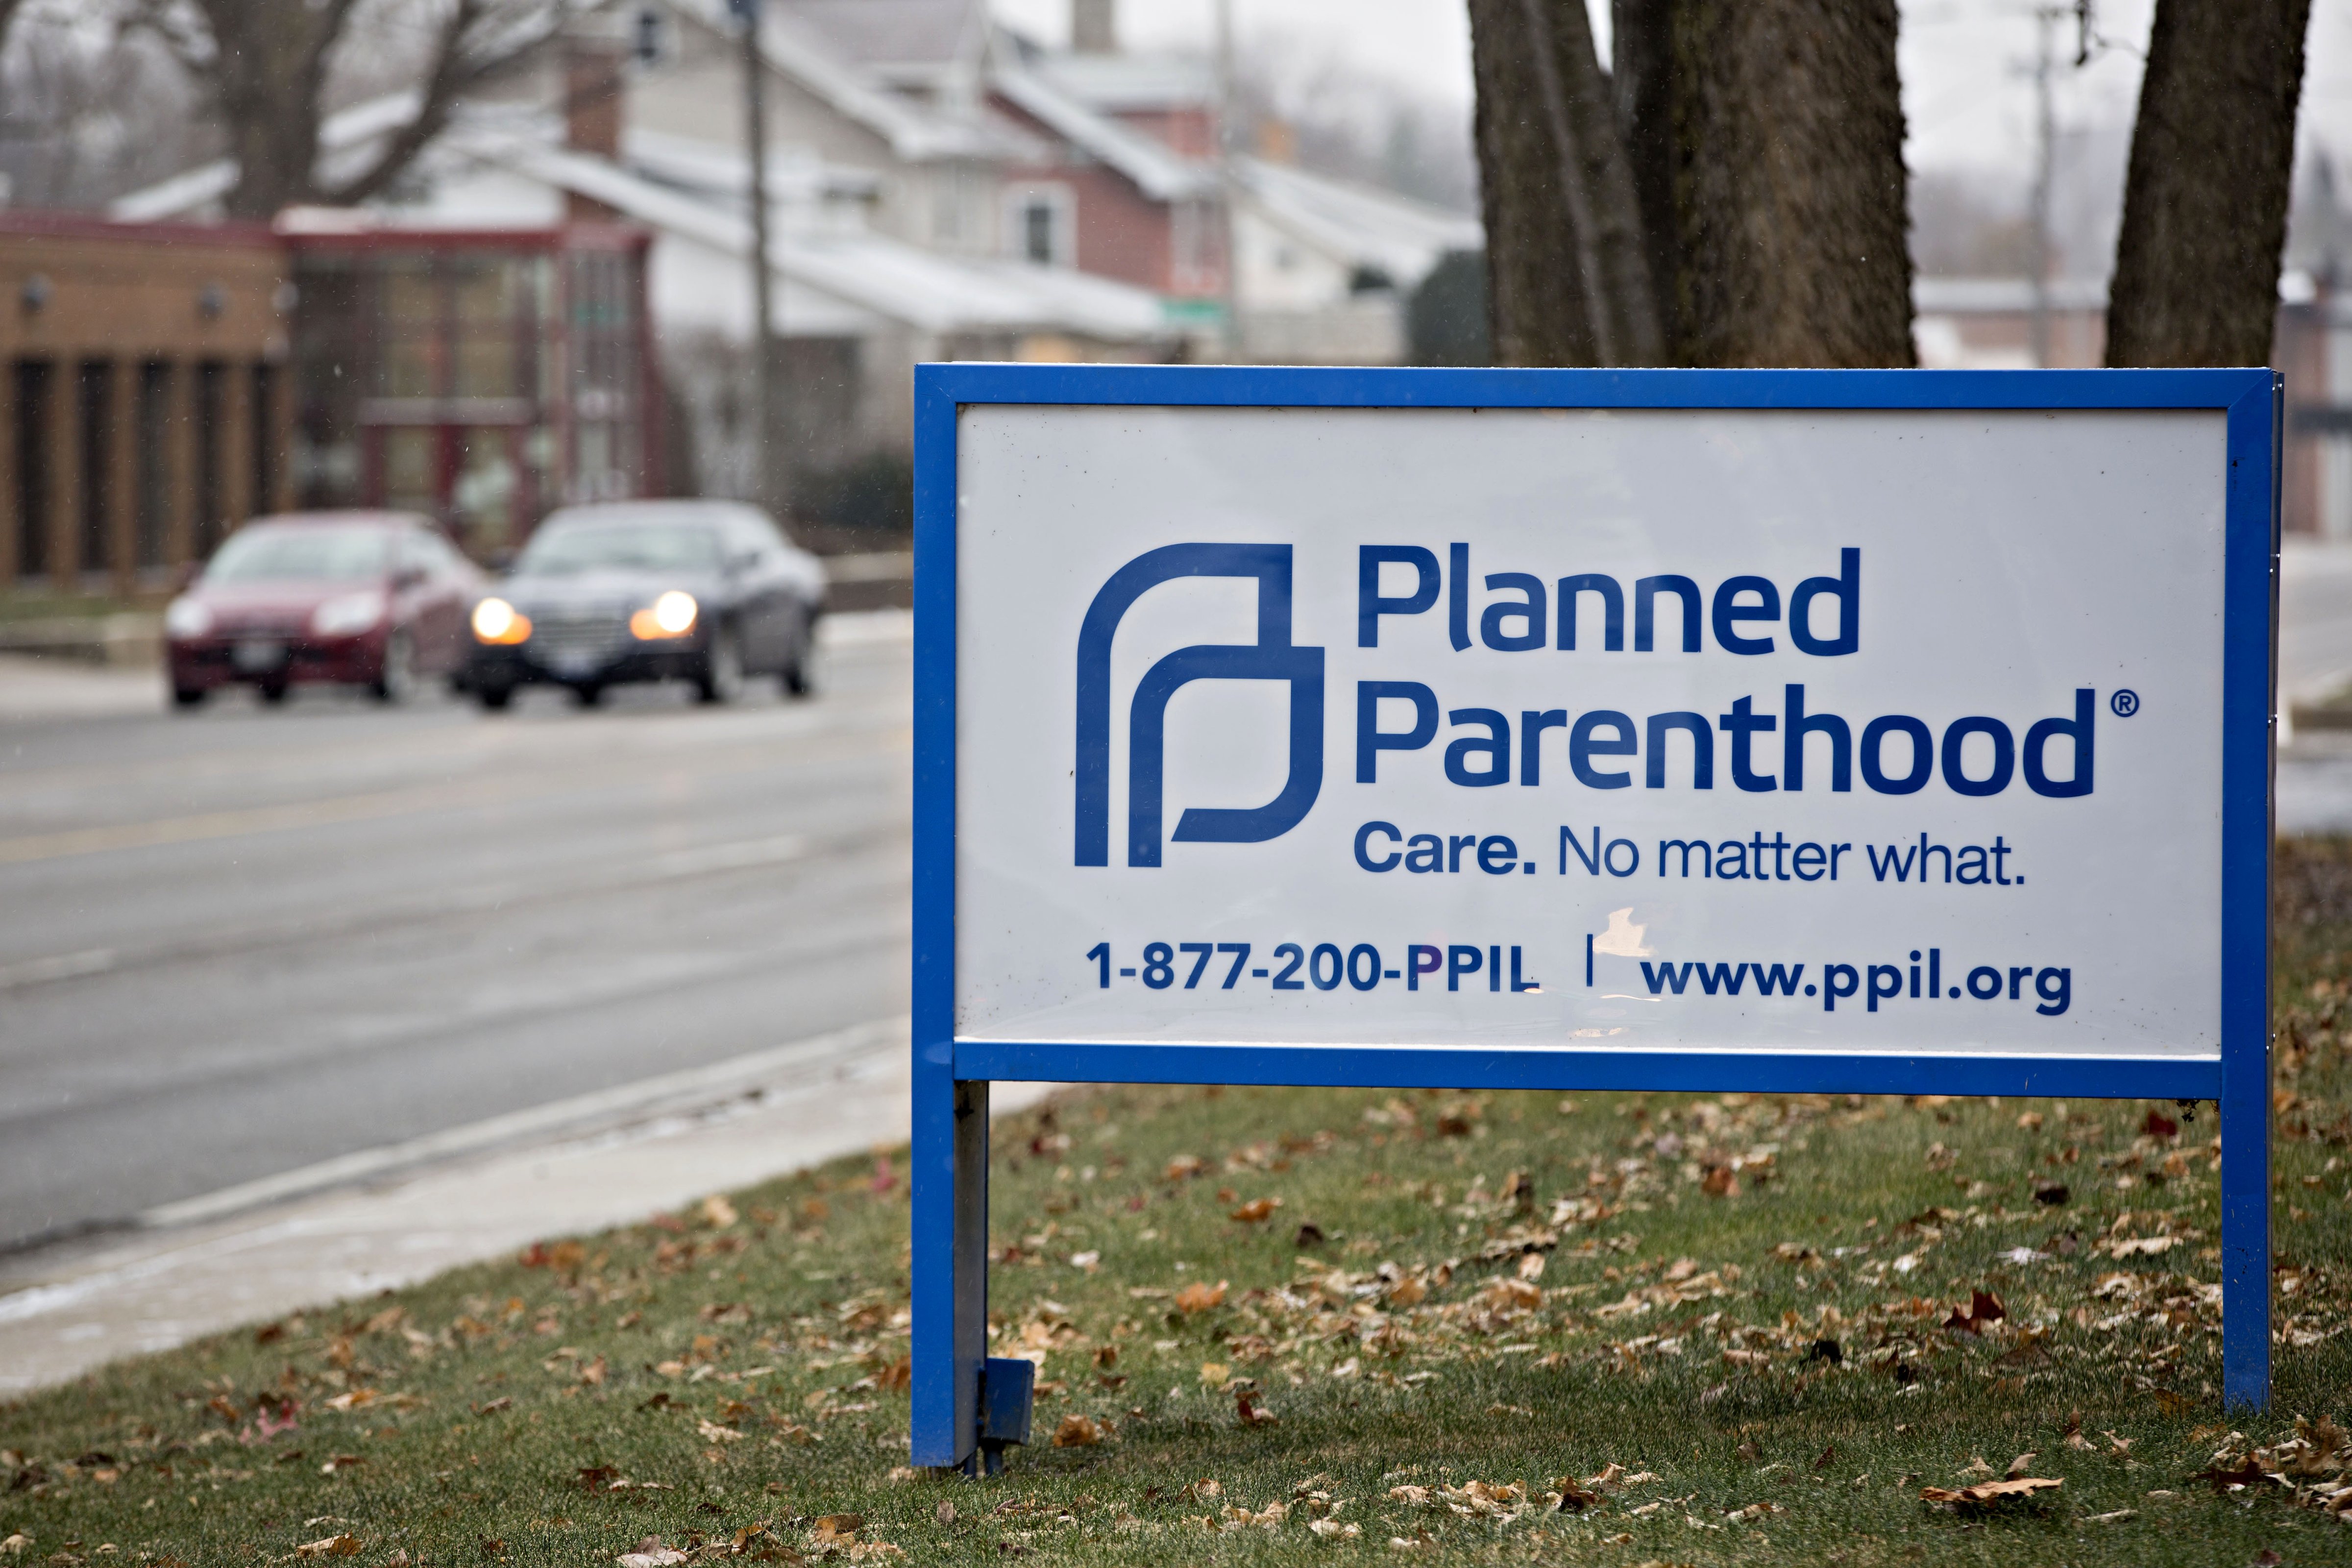 Signage is displayed outside a Planned Parenthood office in Peoria, Illinois, on Dec. 16, 2016. (Daniel Acker—Bloomberg/Getty Images)